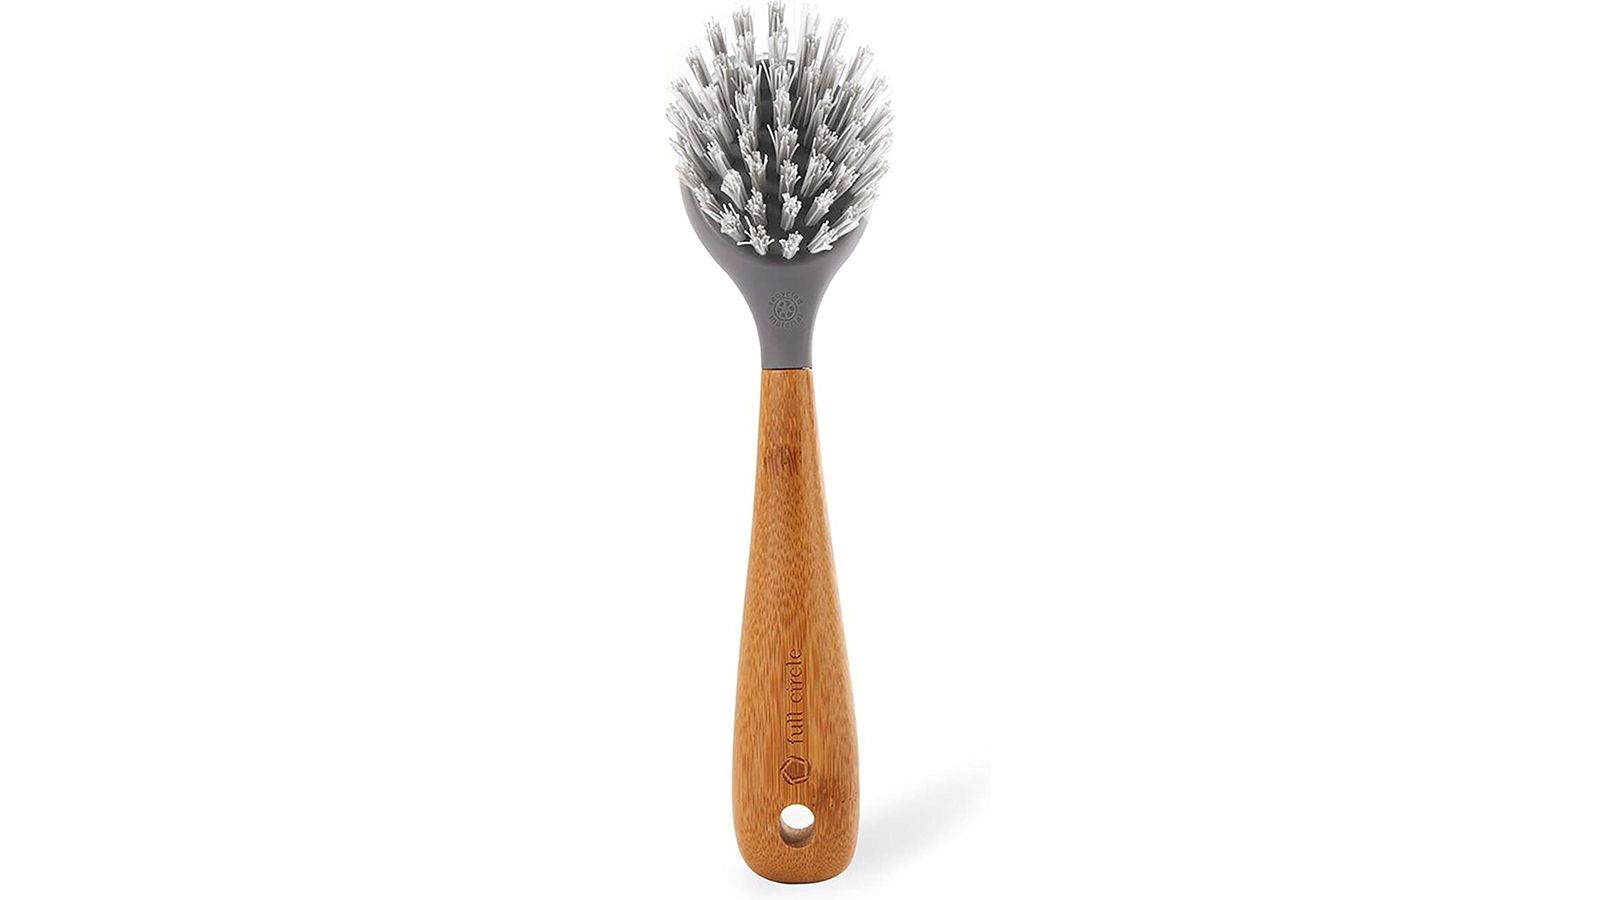 https://media.cnn.com/api/v1/images/stellar/prod/how-to-clean-enameled-cookware-full-circle-tenacious-c-cast-iron-brush-and-scraper-with-bamboo-handle-skillet-scrubber-with-tough-nylon-bristles.jpg?q=h_900,w_1600,x_0,y_0